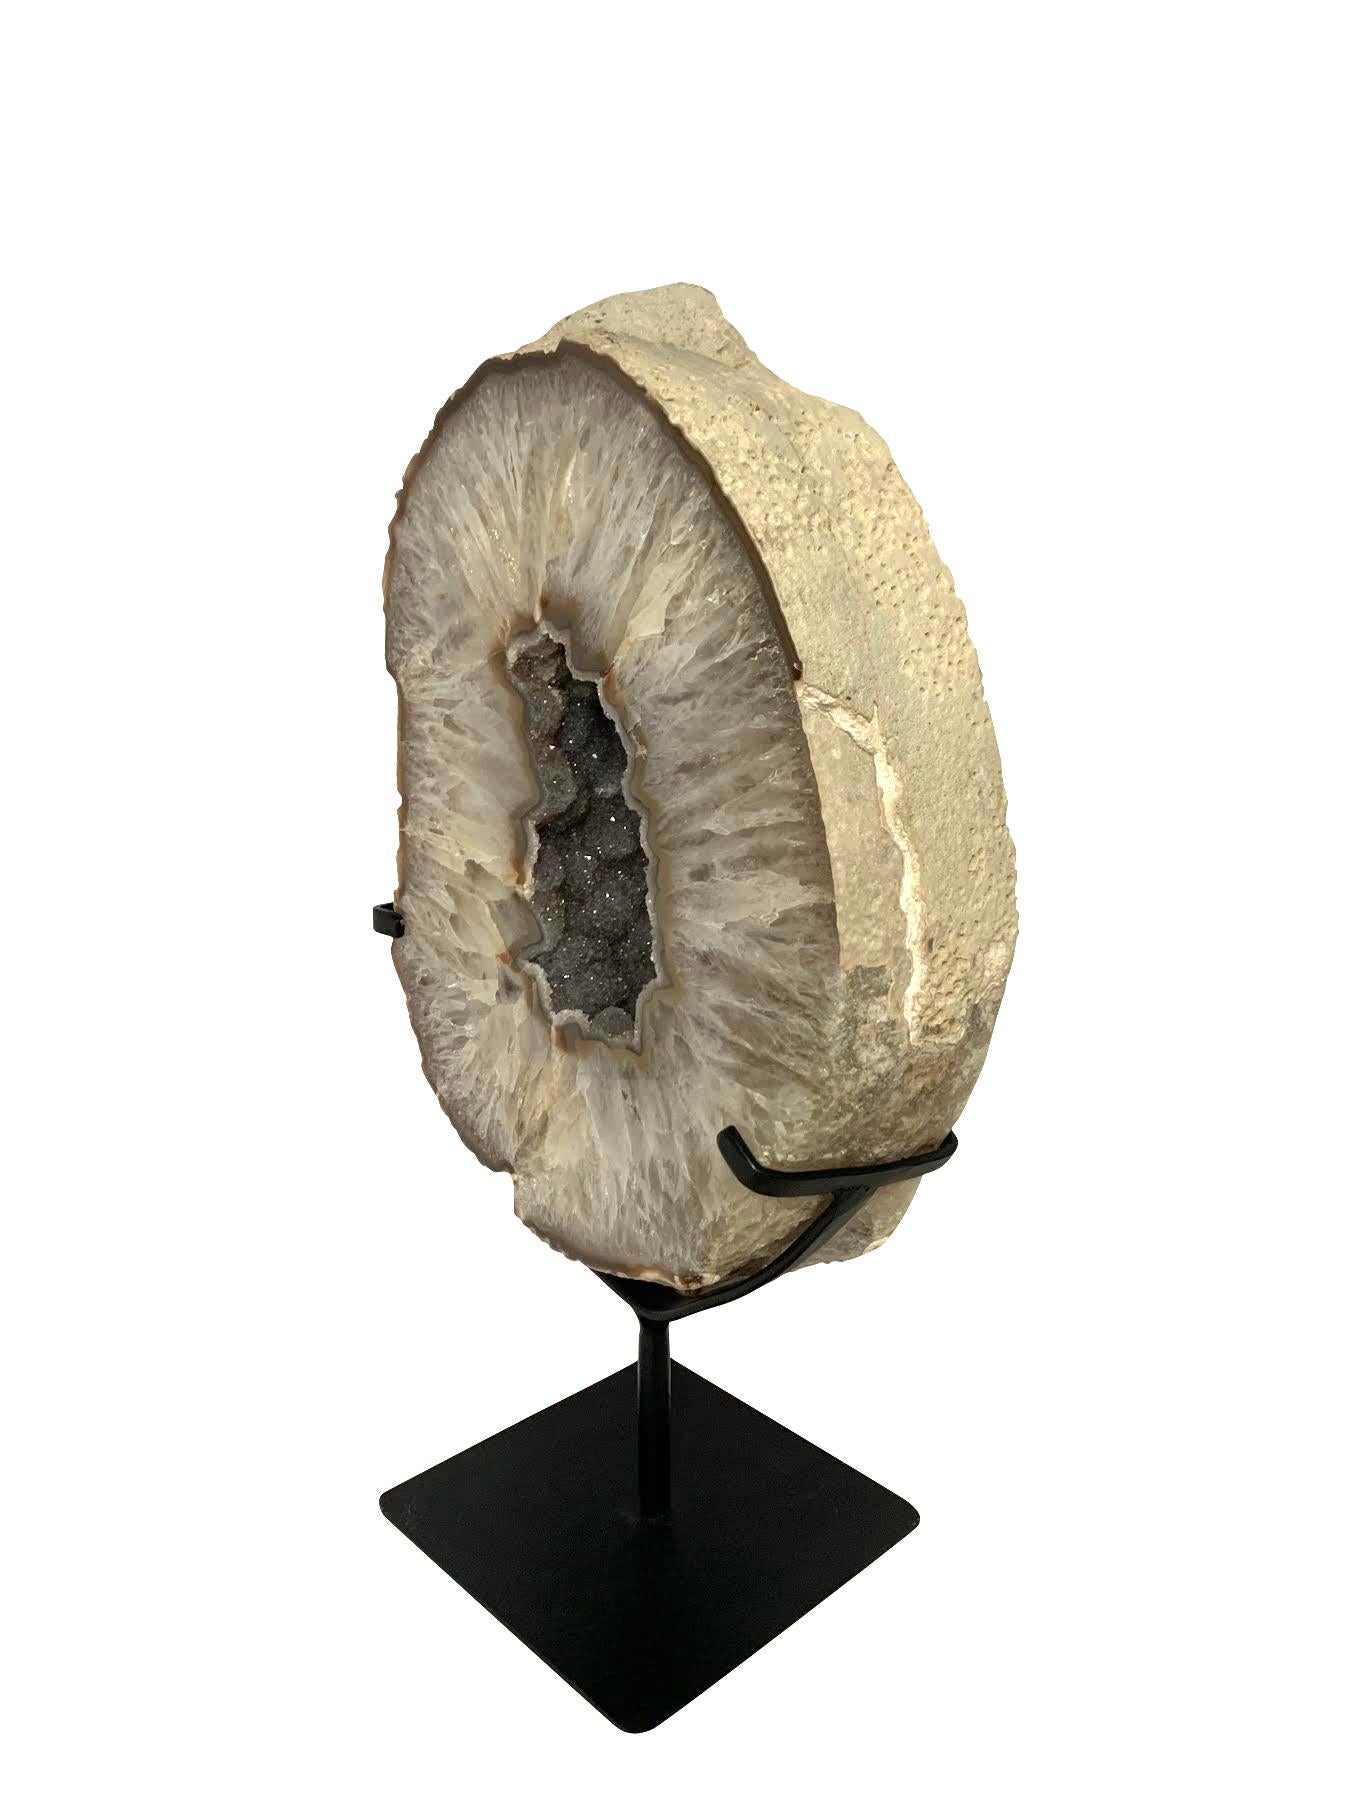 Prehistoric Brazilian thick agate geode on stand.
Center hole reveals beautiful natural silver crystals.
Stand measures 6